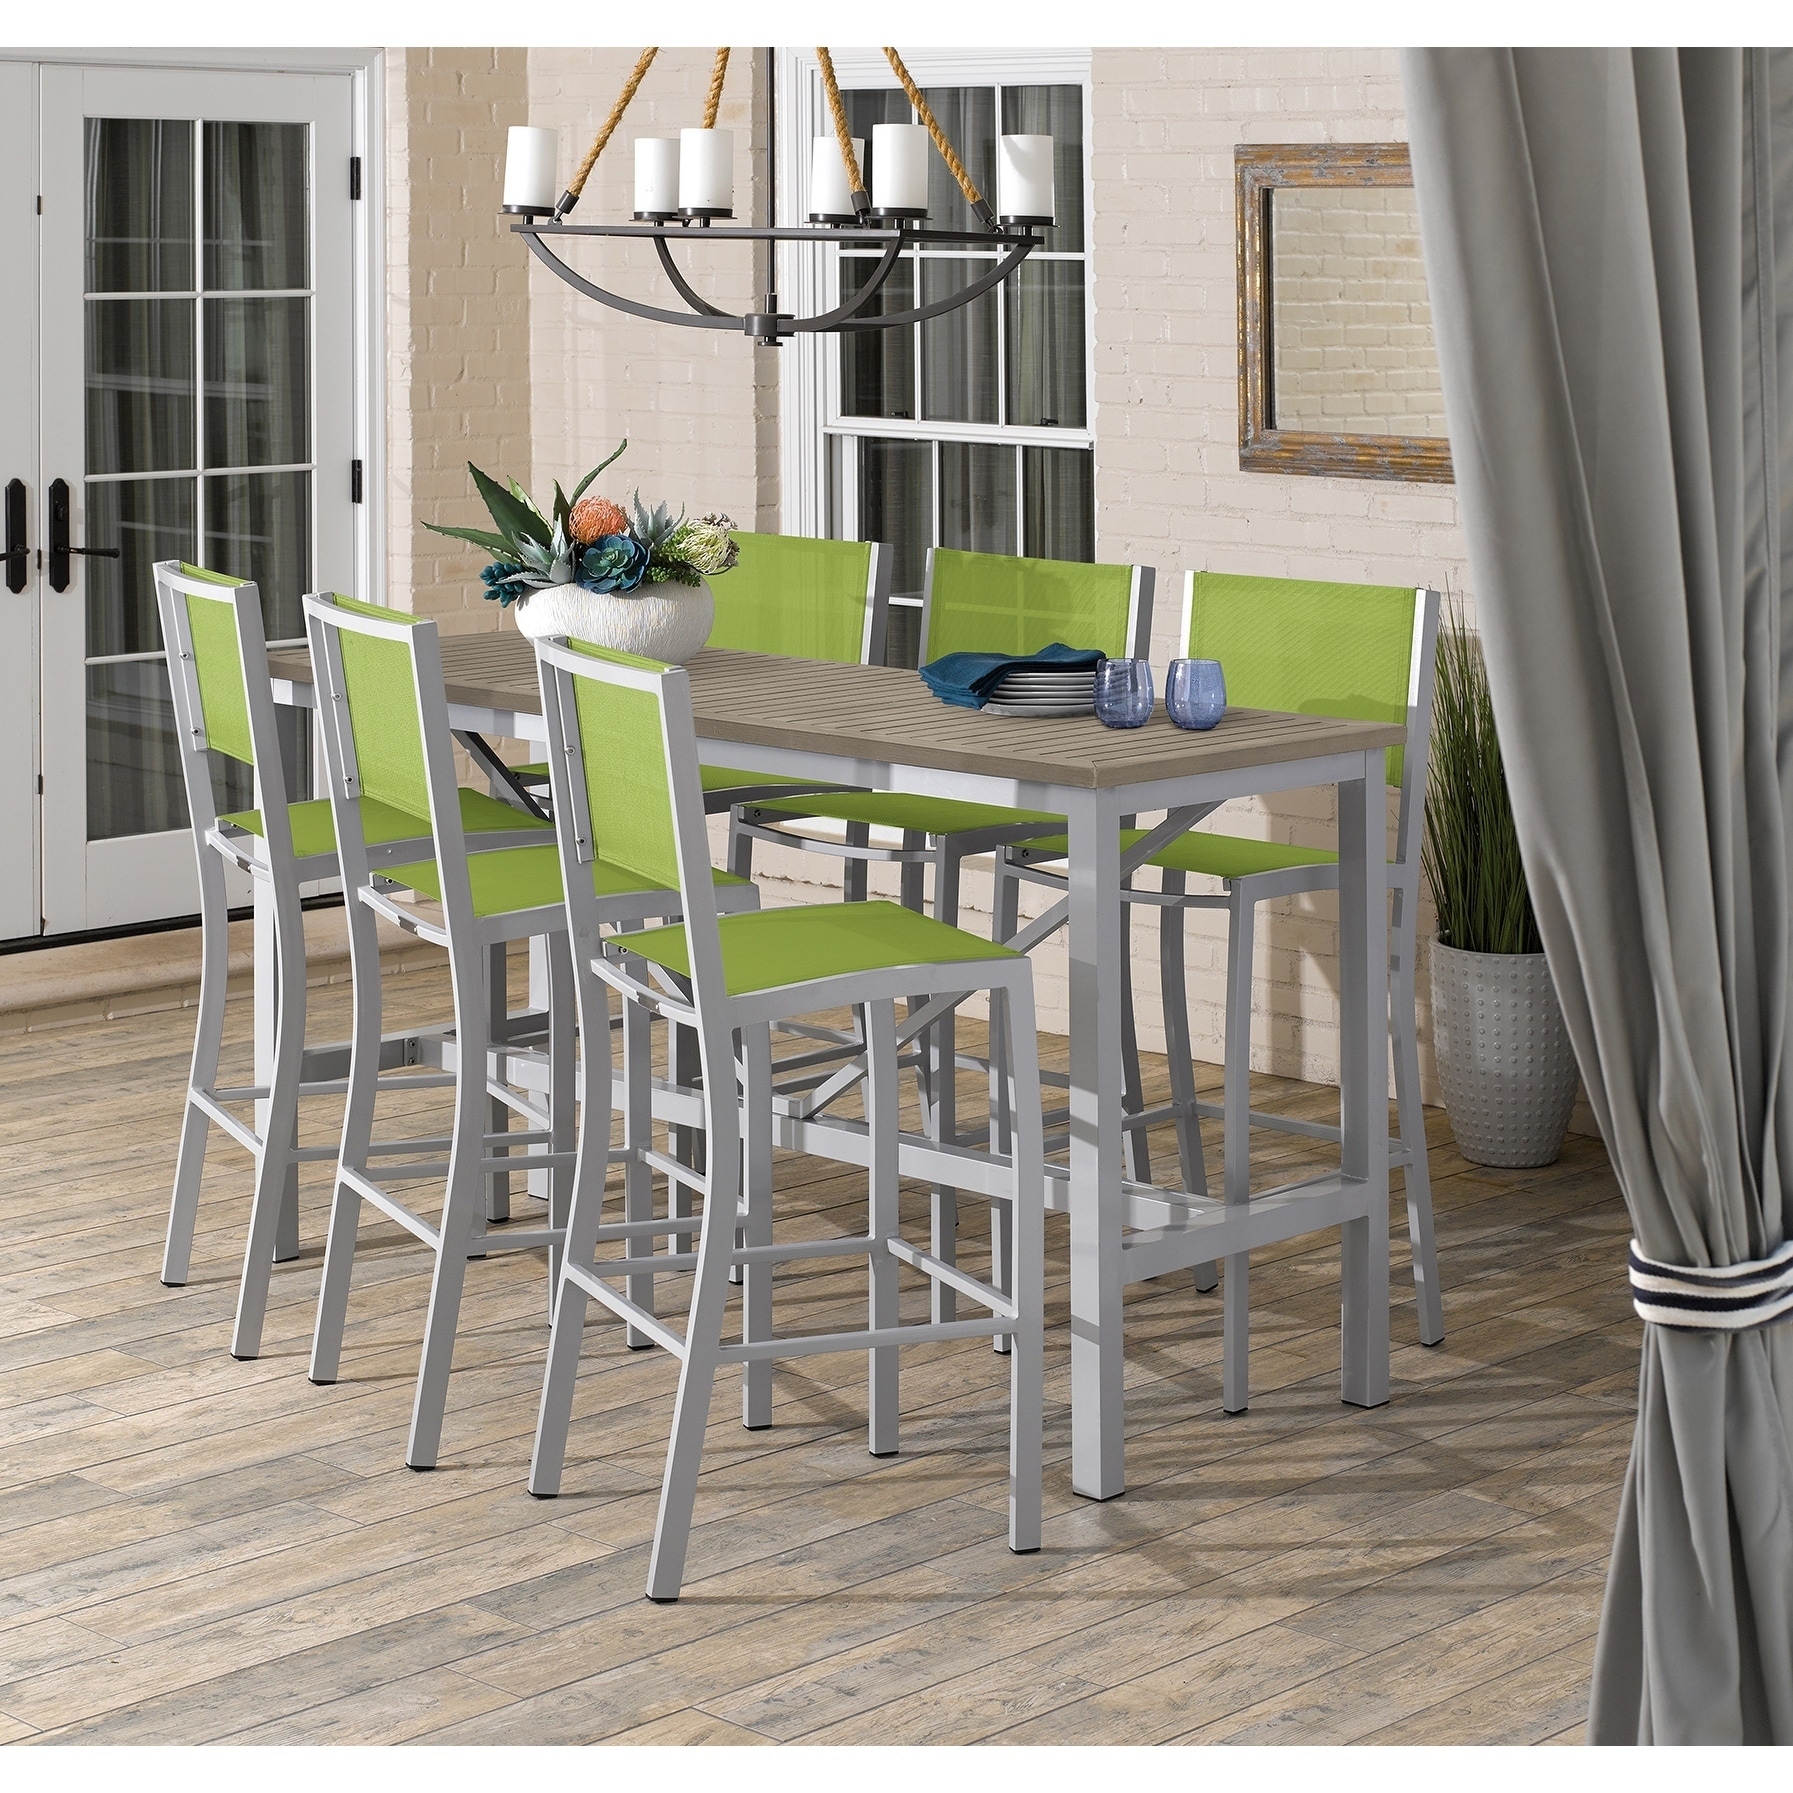 Oxford Garden Travira 7-piece 72-in X 30-in Tekwood Vintage Bar Table and Sling Bar Chair Set - Go Green Sling